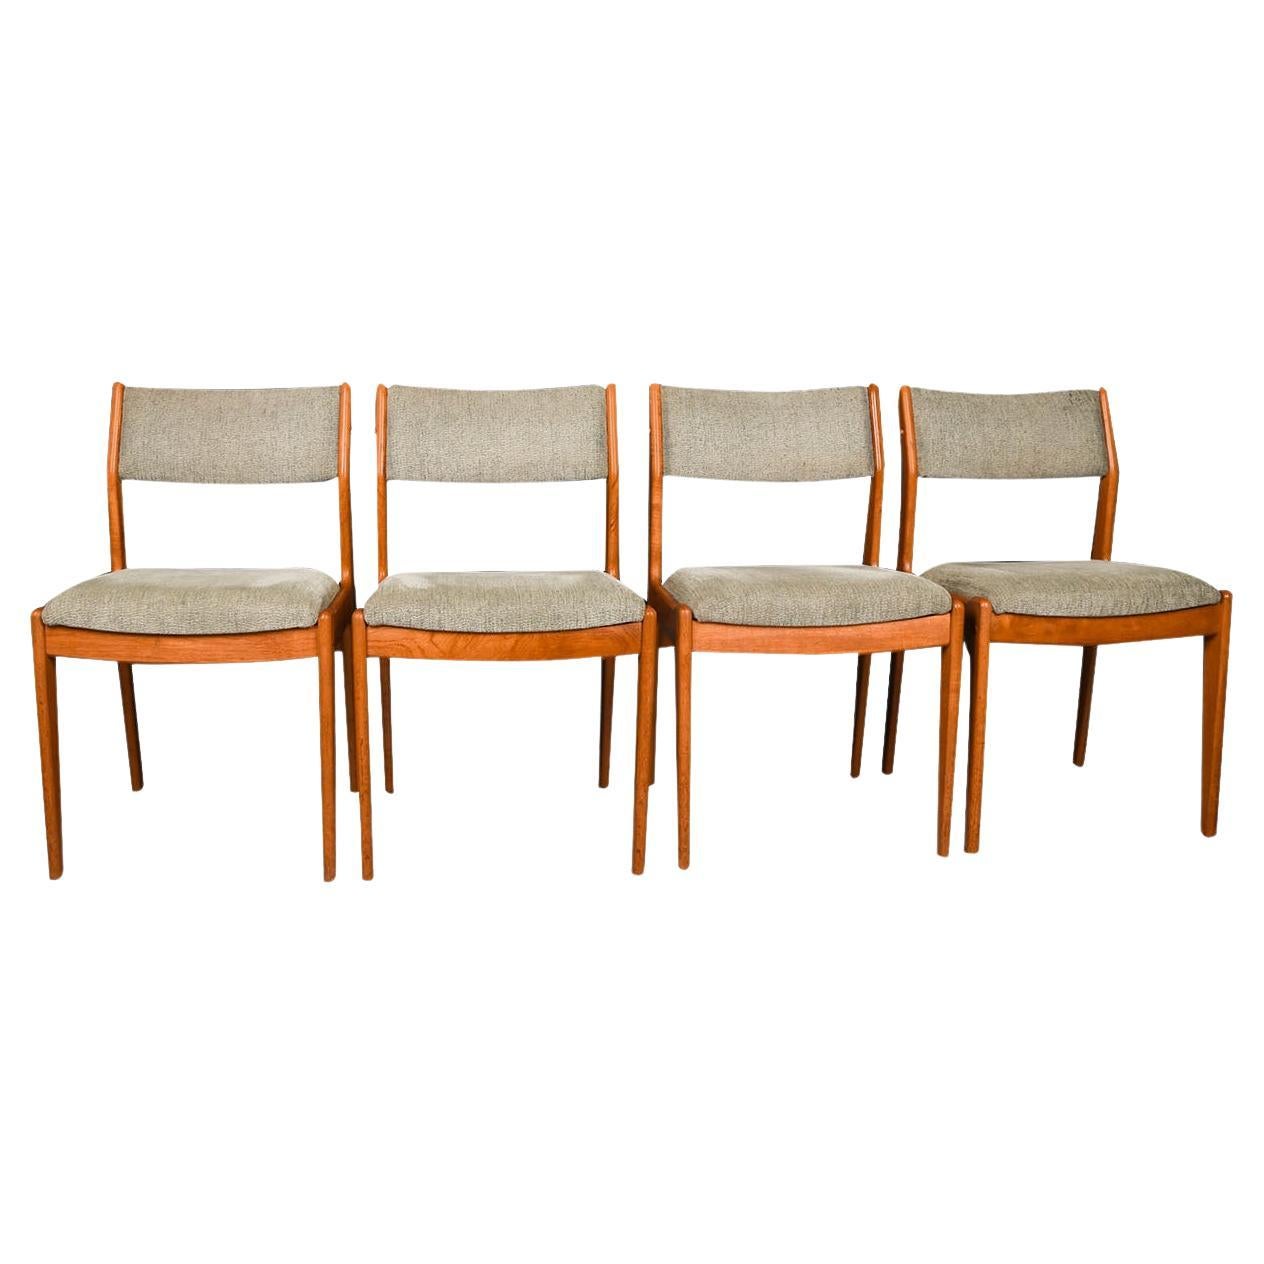 Mid Century Modern Vintage Teak Dining Chairs For Sale